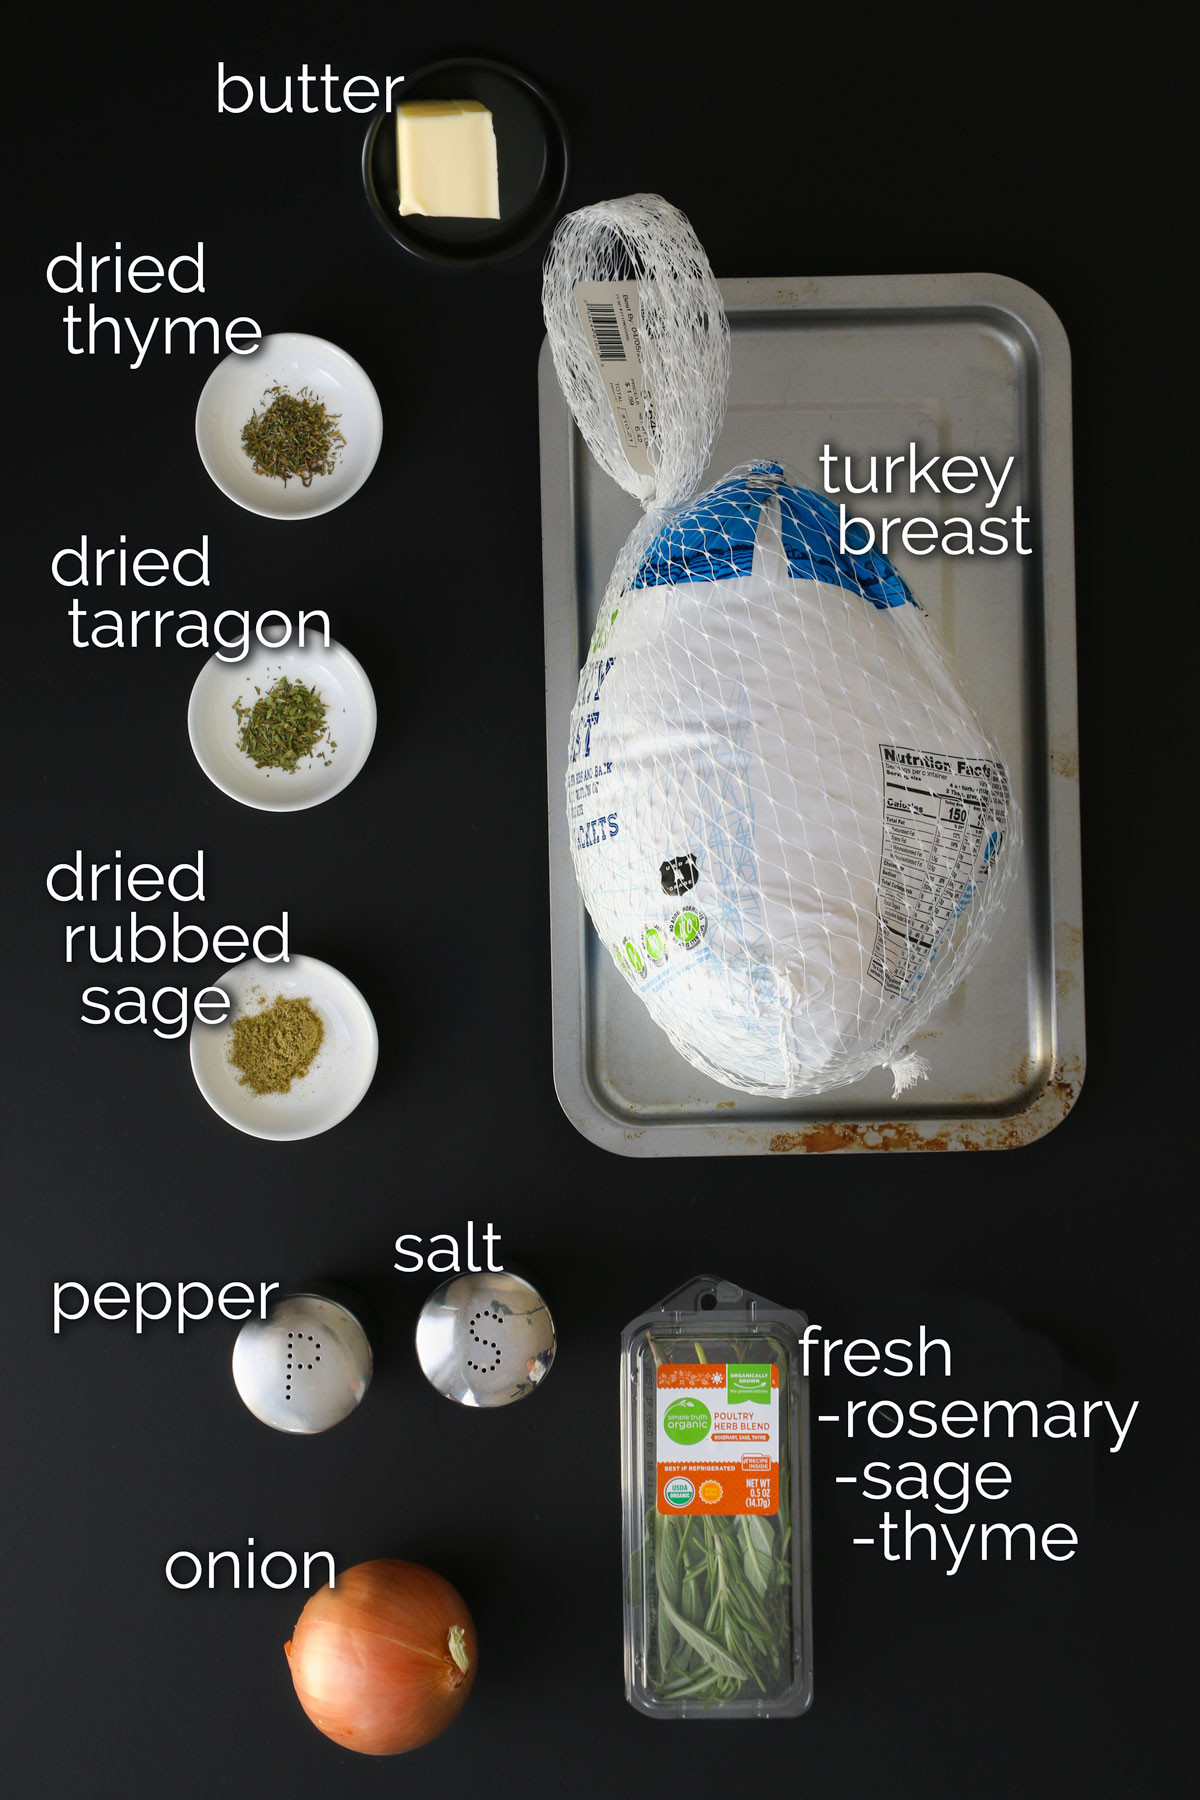 ingredients for roast turkey breast laid out on black table.